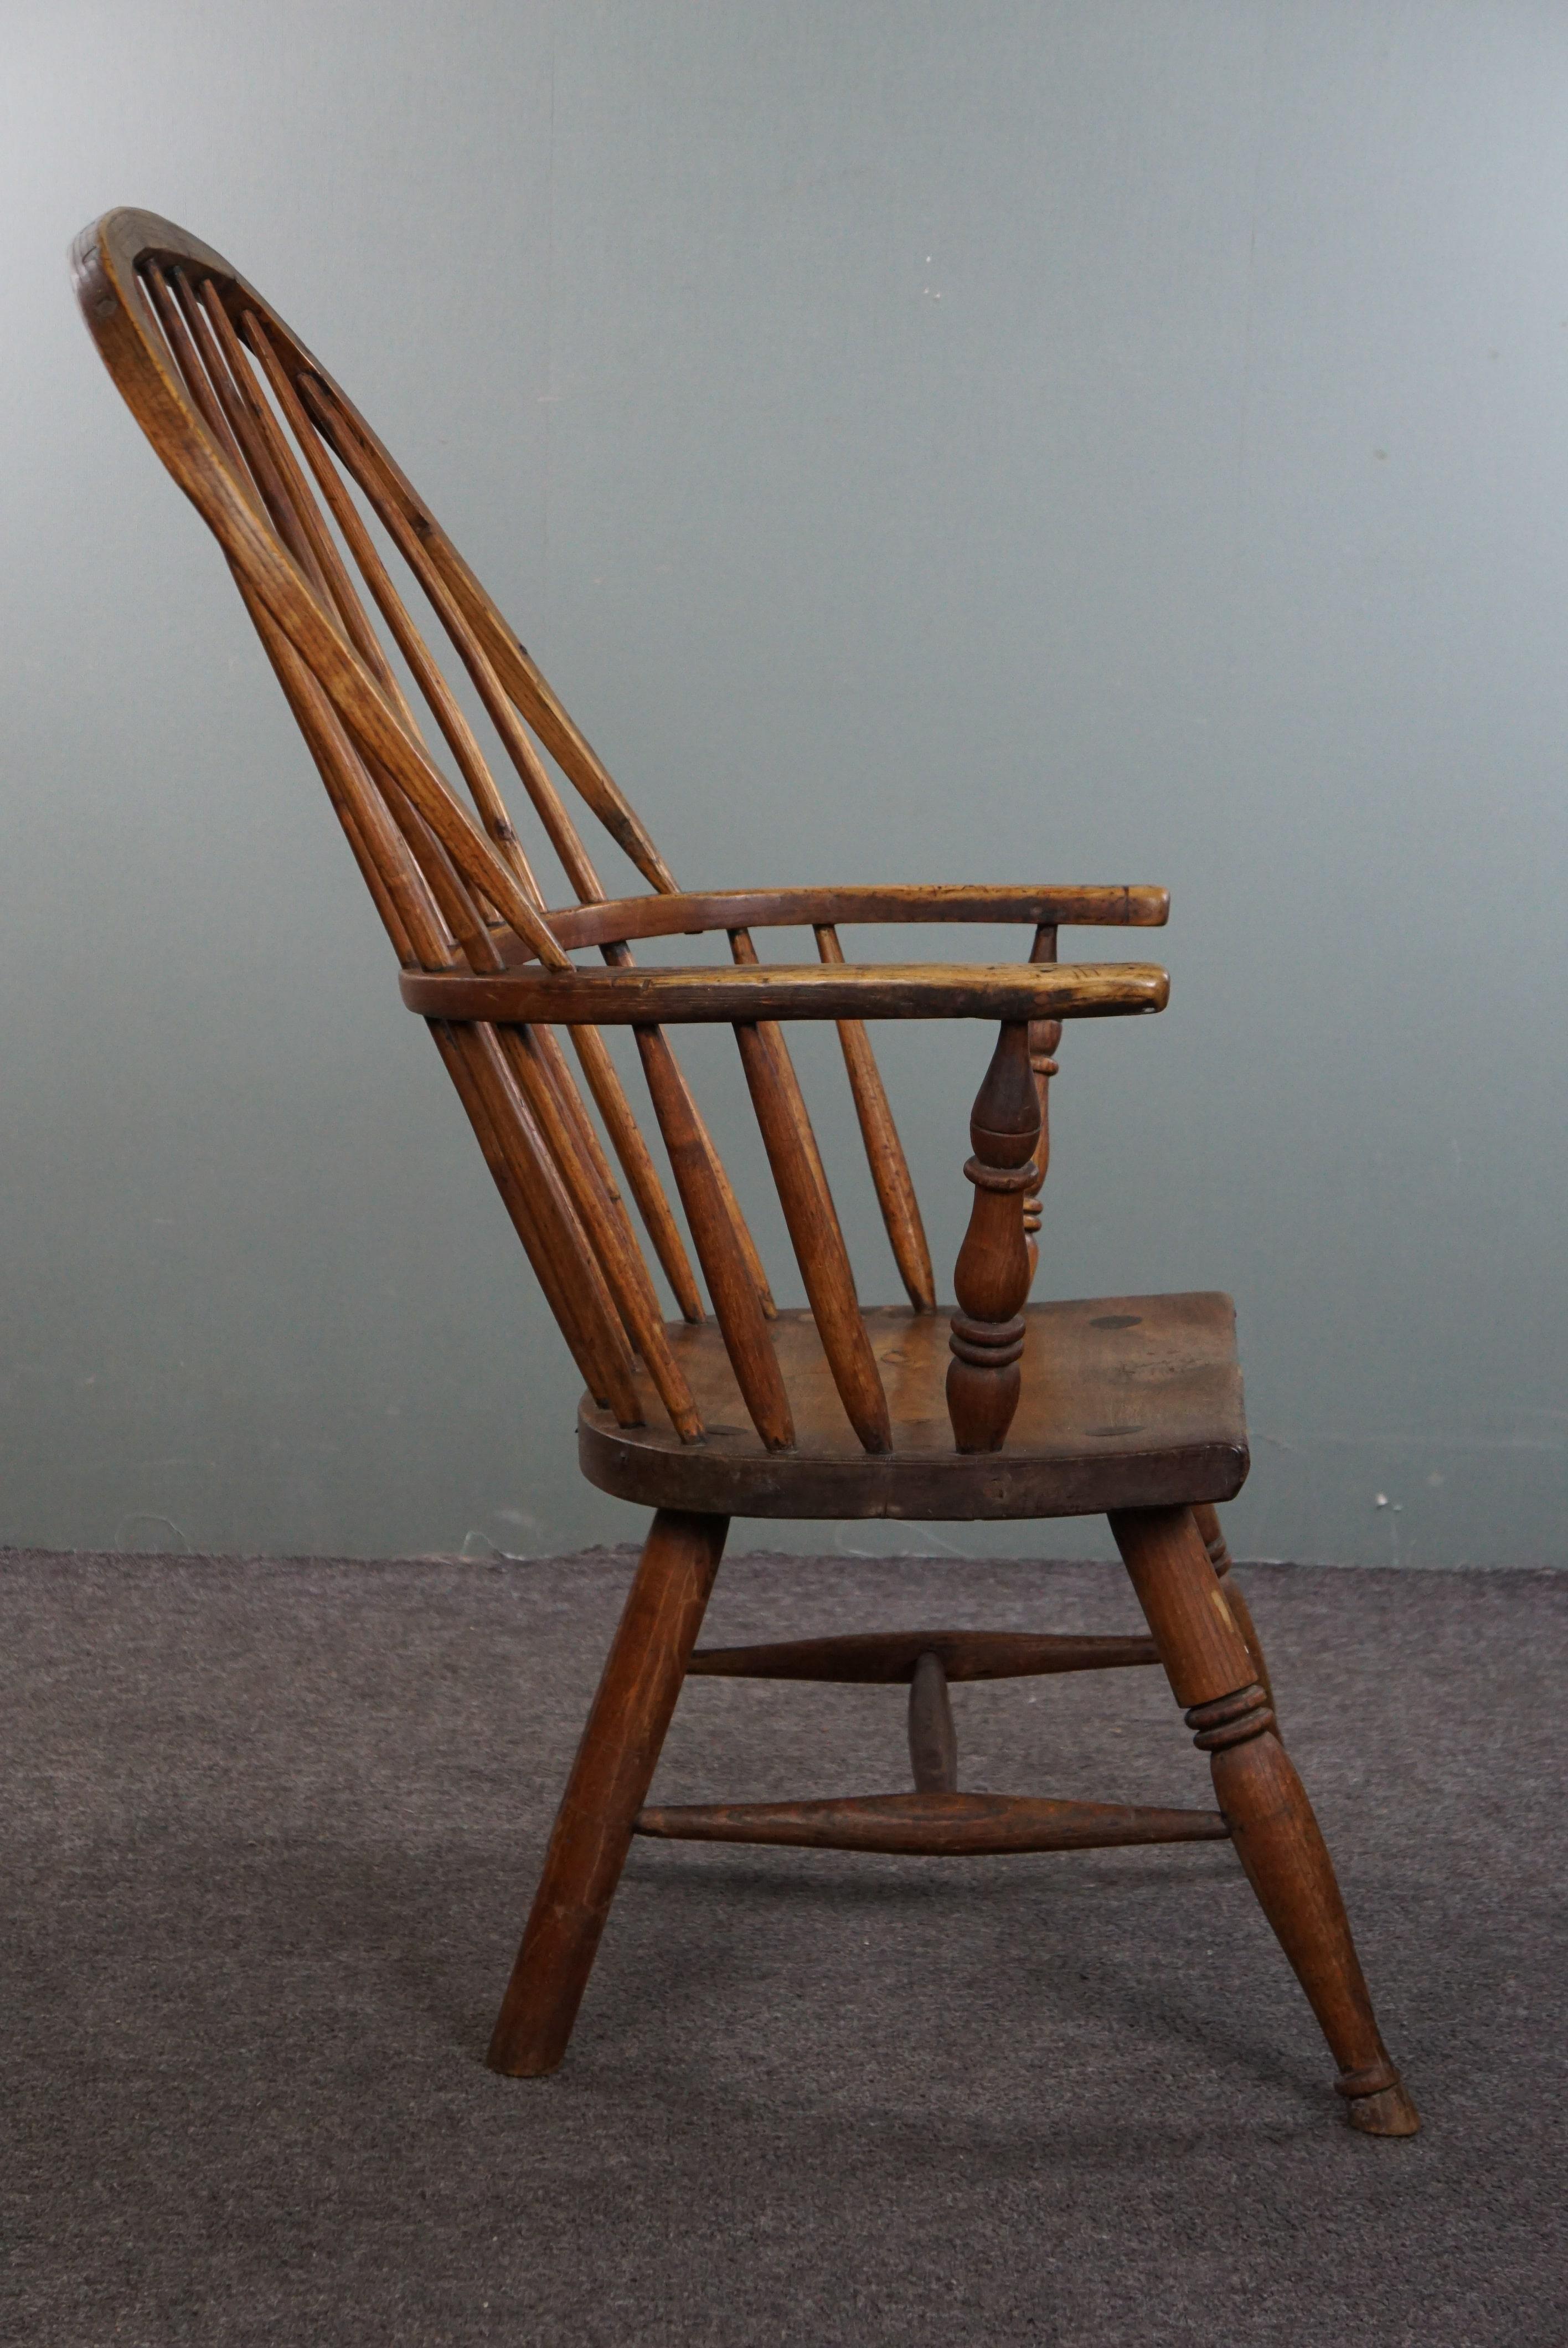 British Colonial Beautiful antique English stick back Windsor chair from the early 19th century For Sale